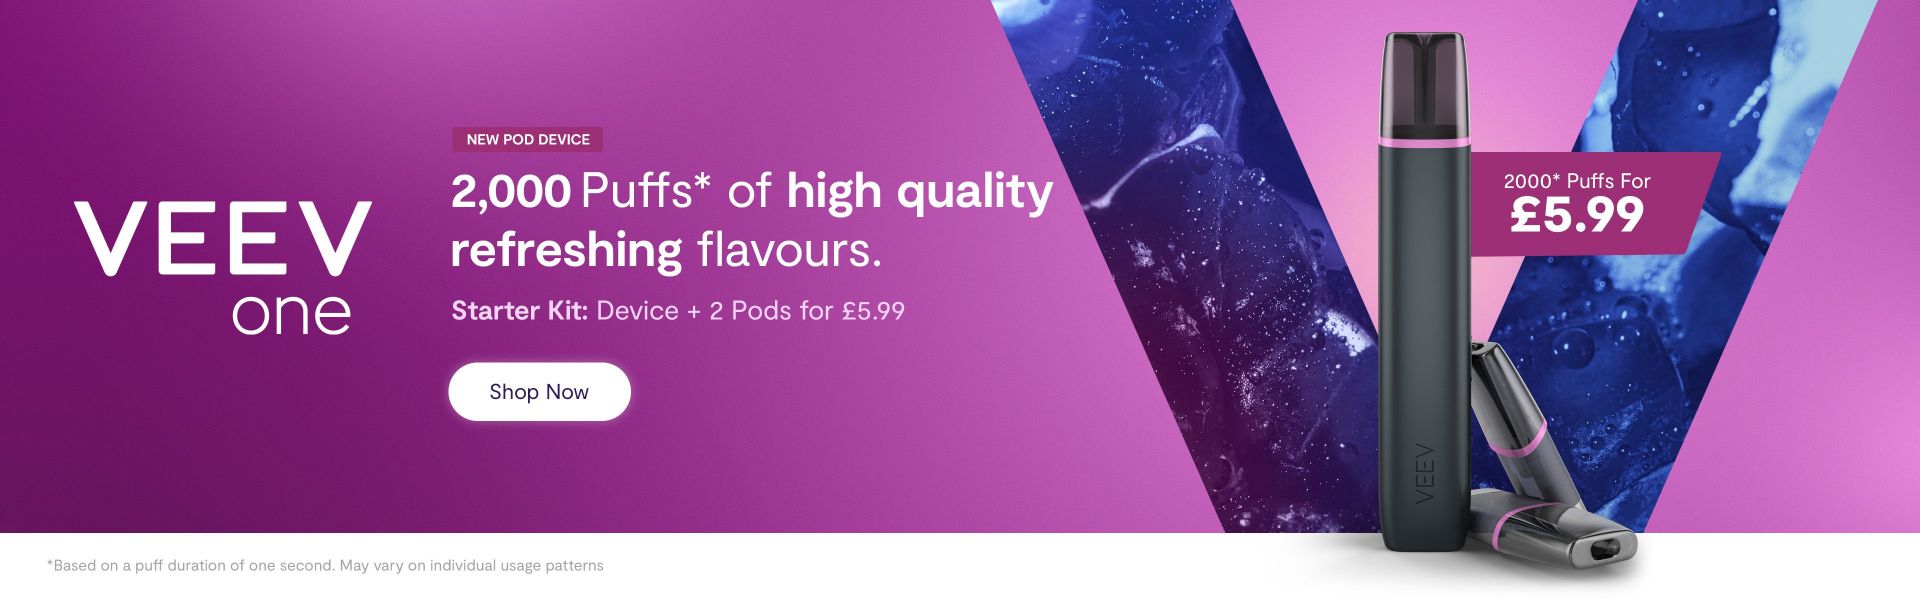 VEEV One - 2000 Puffs of high quality refreshing flavours.